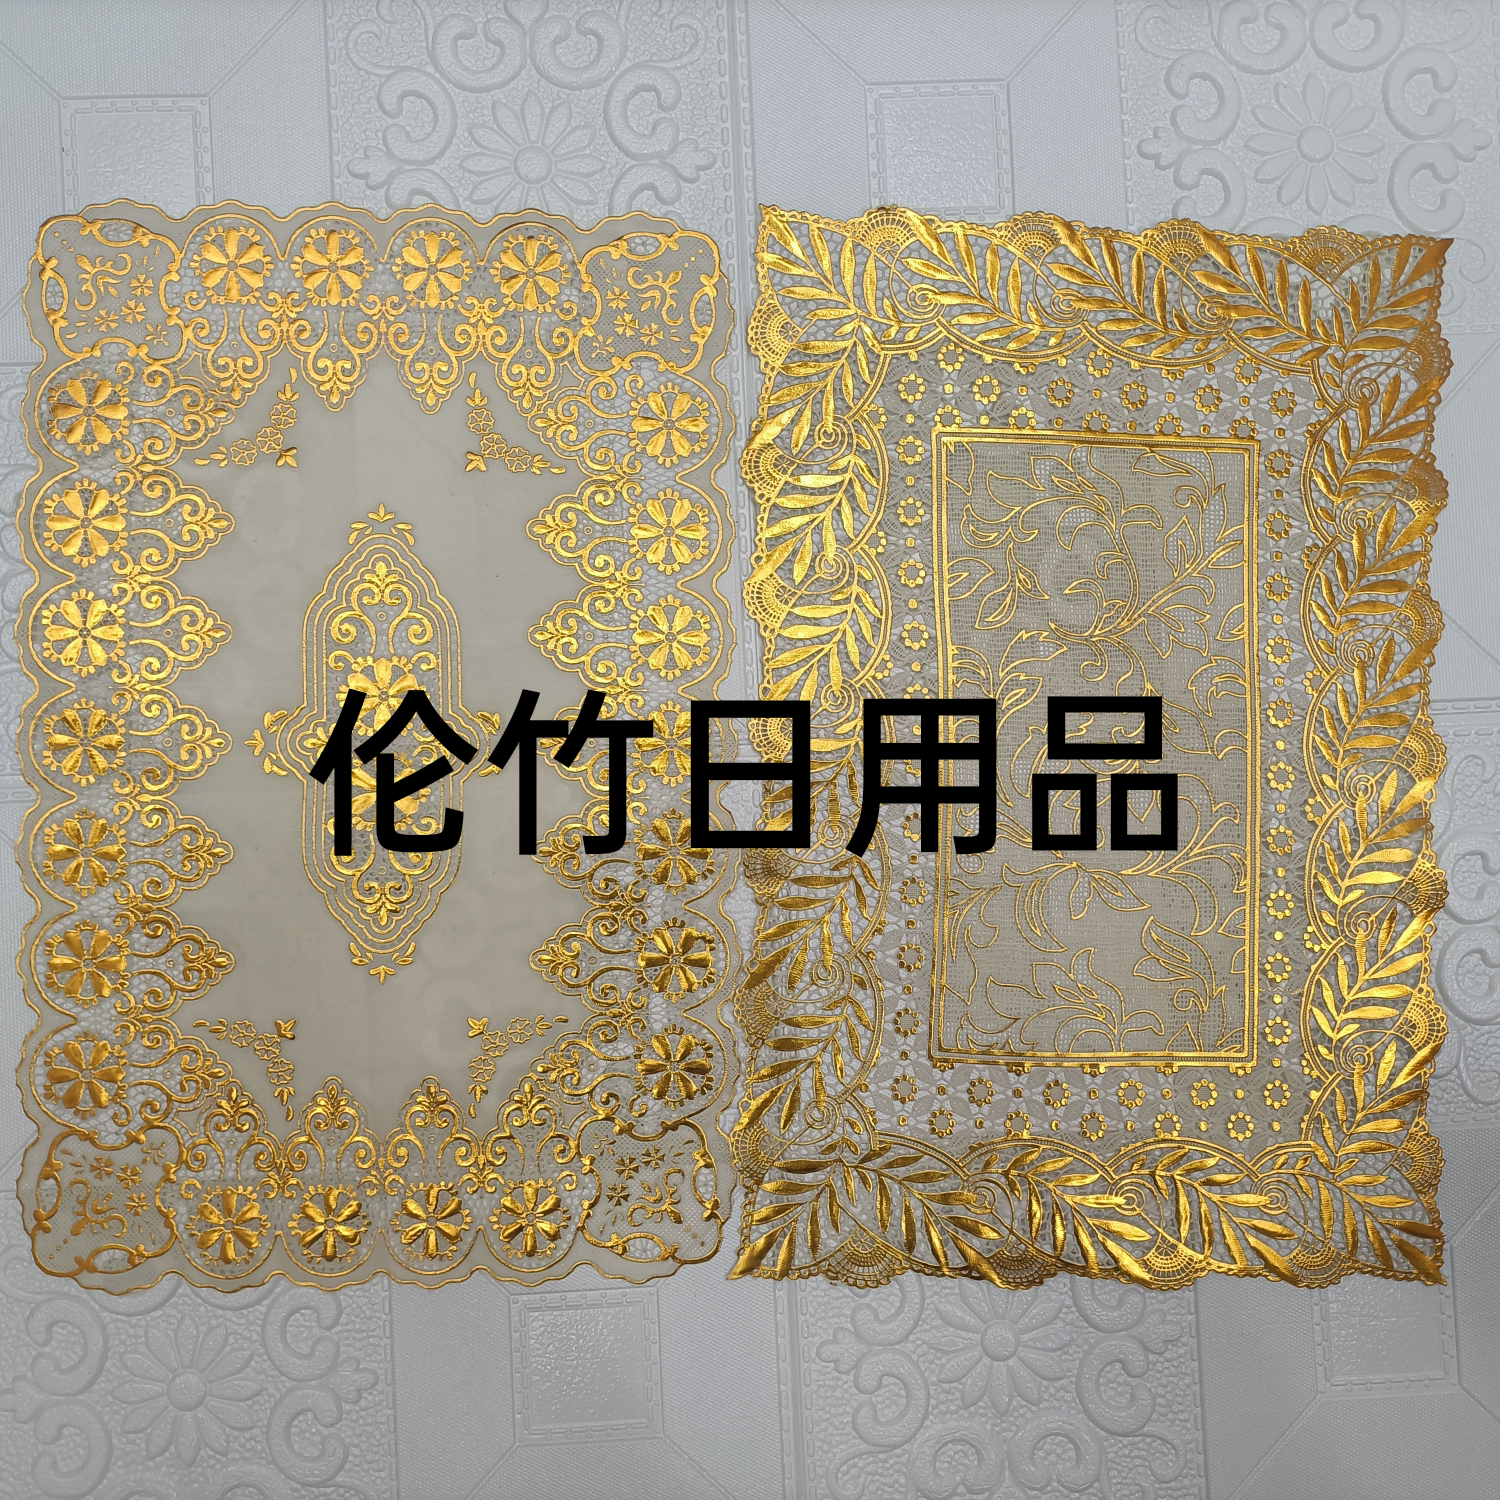 European-style bronzing mats PVC anti-oil and anti-corrugated rectangular cup mats pad table tablecloths